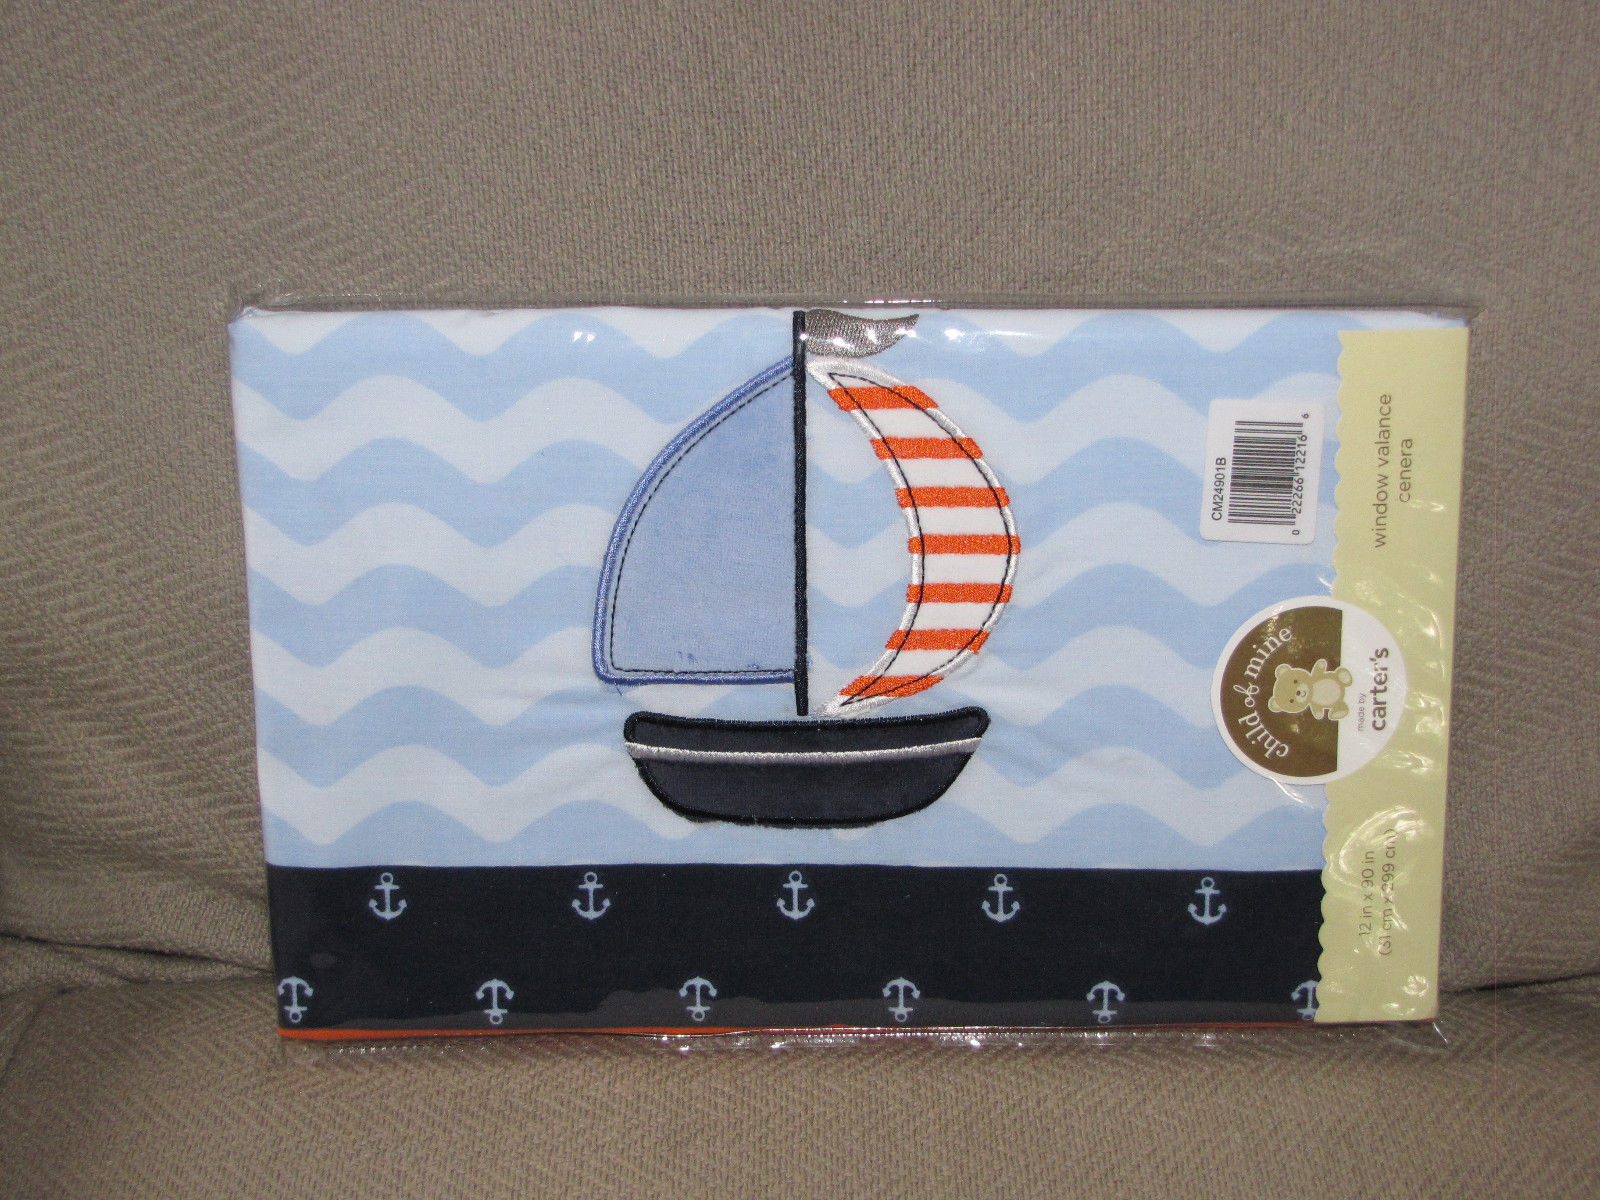 Child of Mine by Carter's Captain Cutie Window Valance Sail Boat Sailboat NEW - $19.79